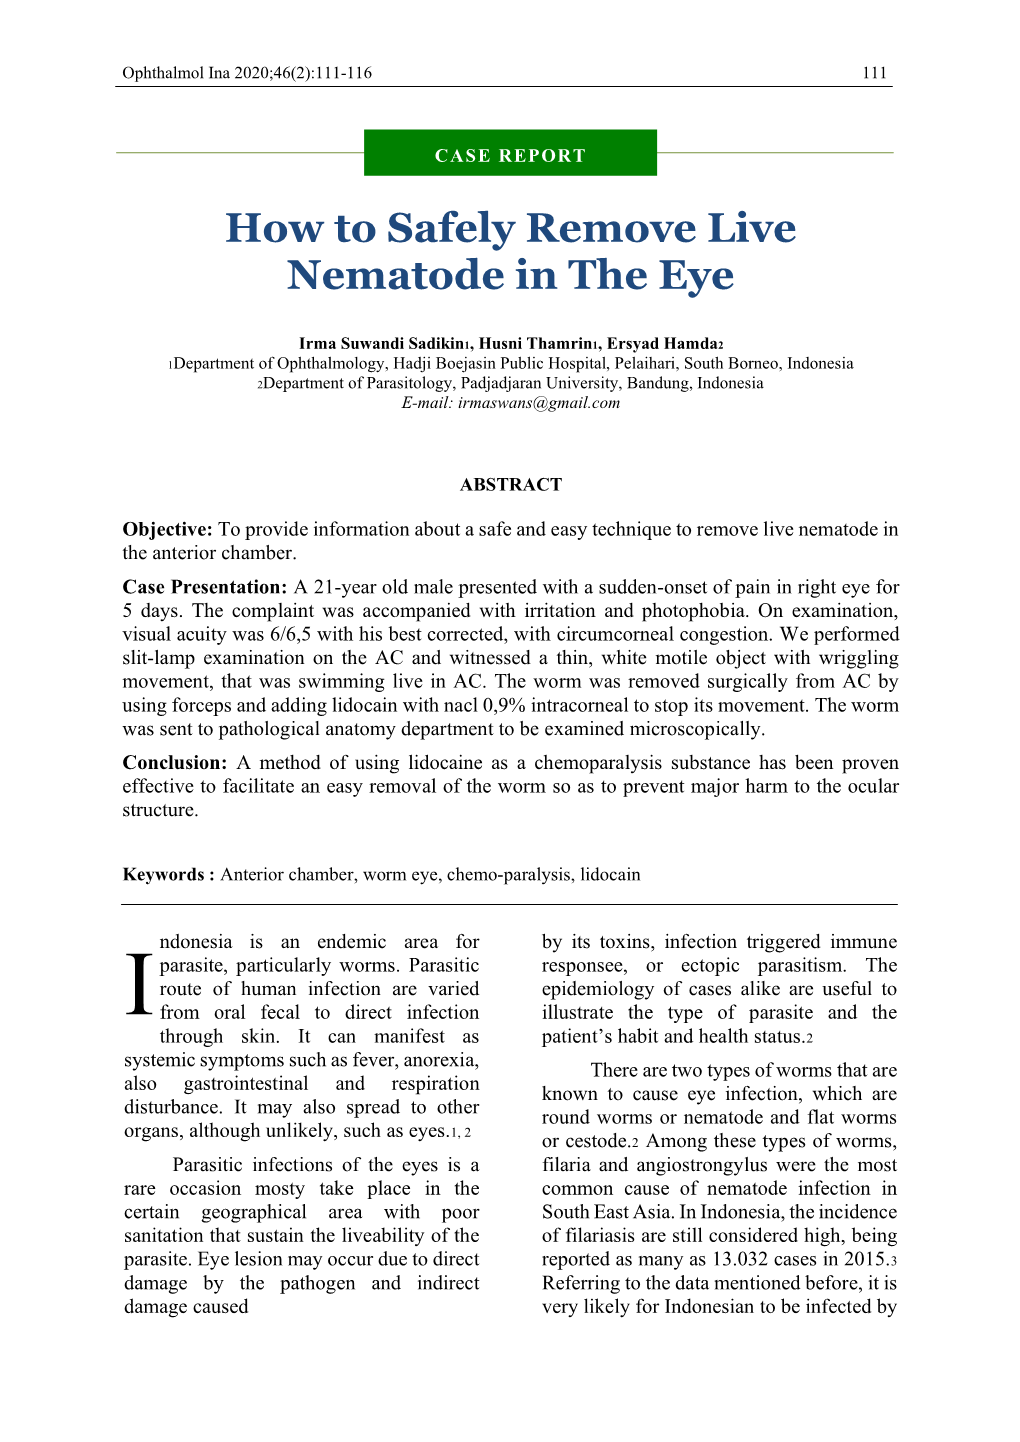 How to Safely Remove Live Nematode in the Eye